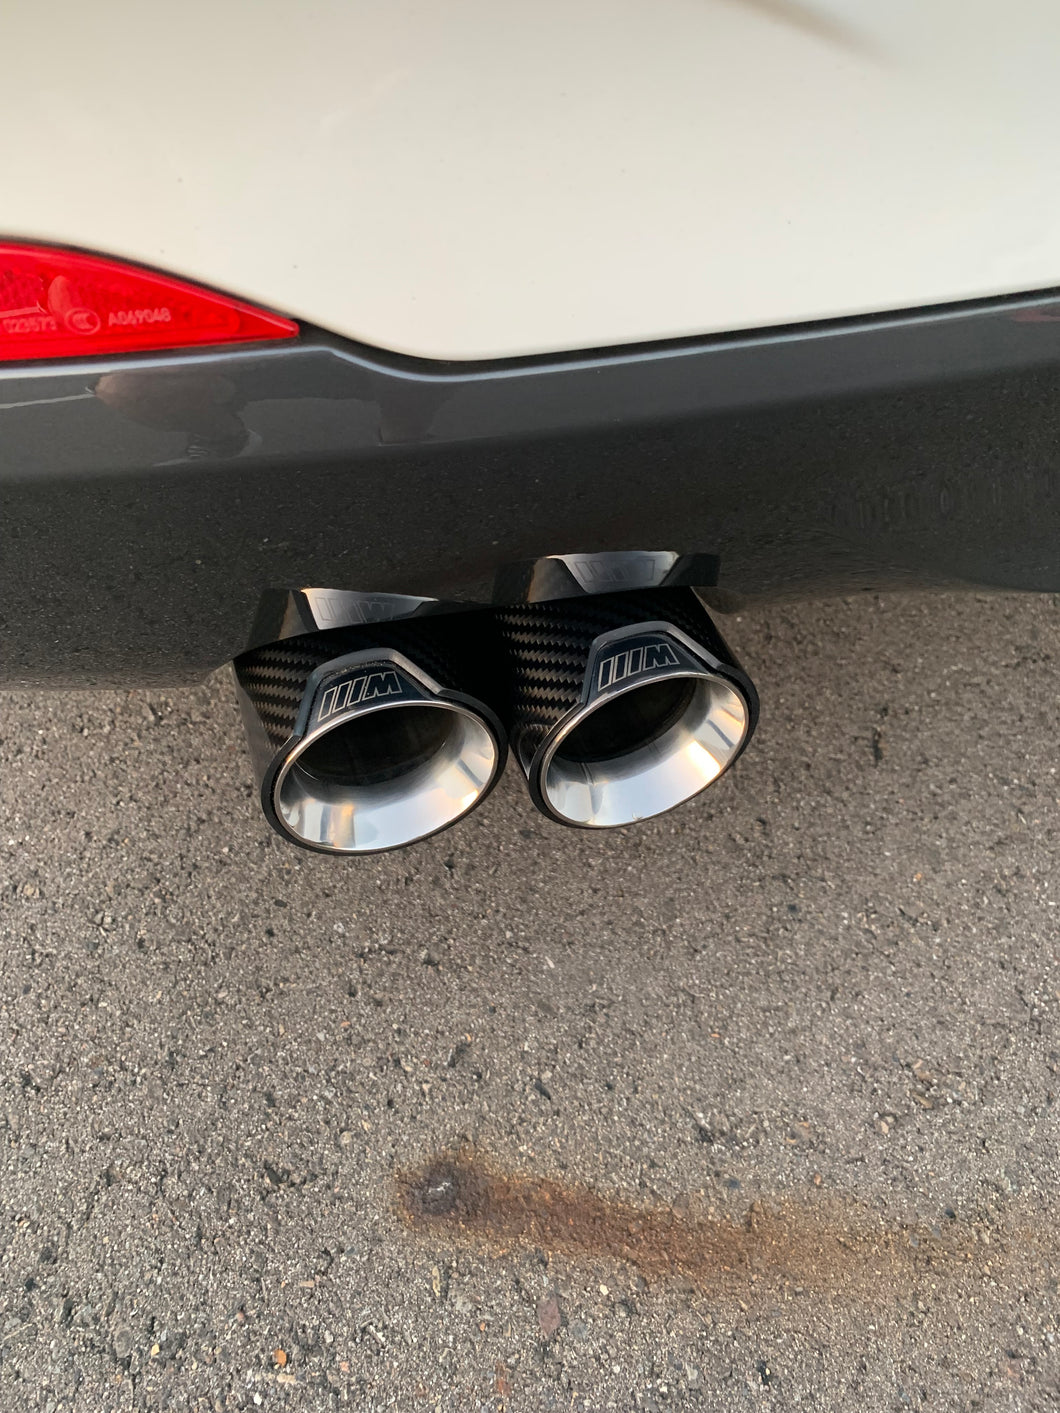 Pair of Silver BMW Exhaust tips for BMW's with a twin exit